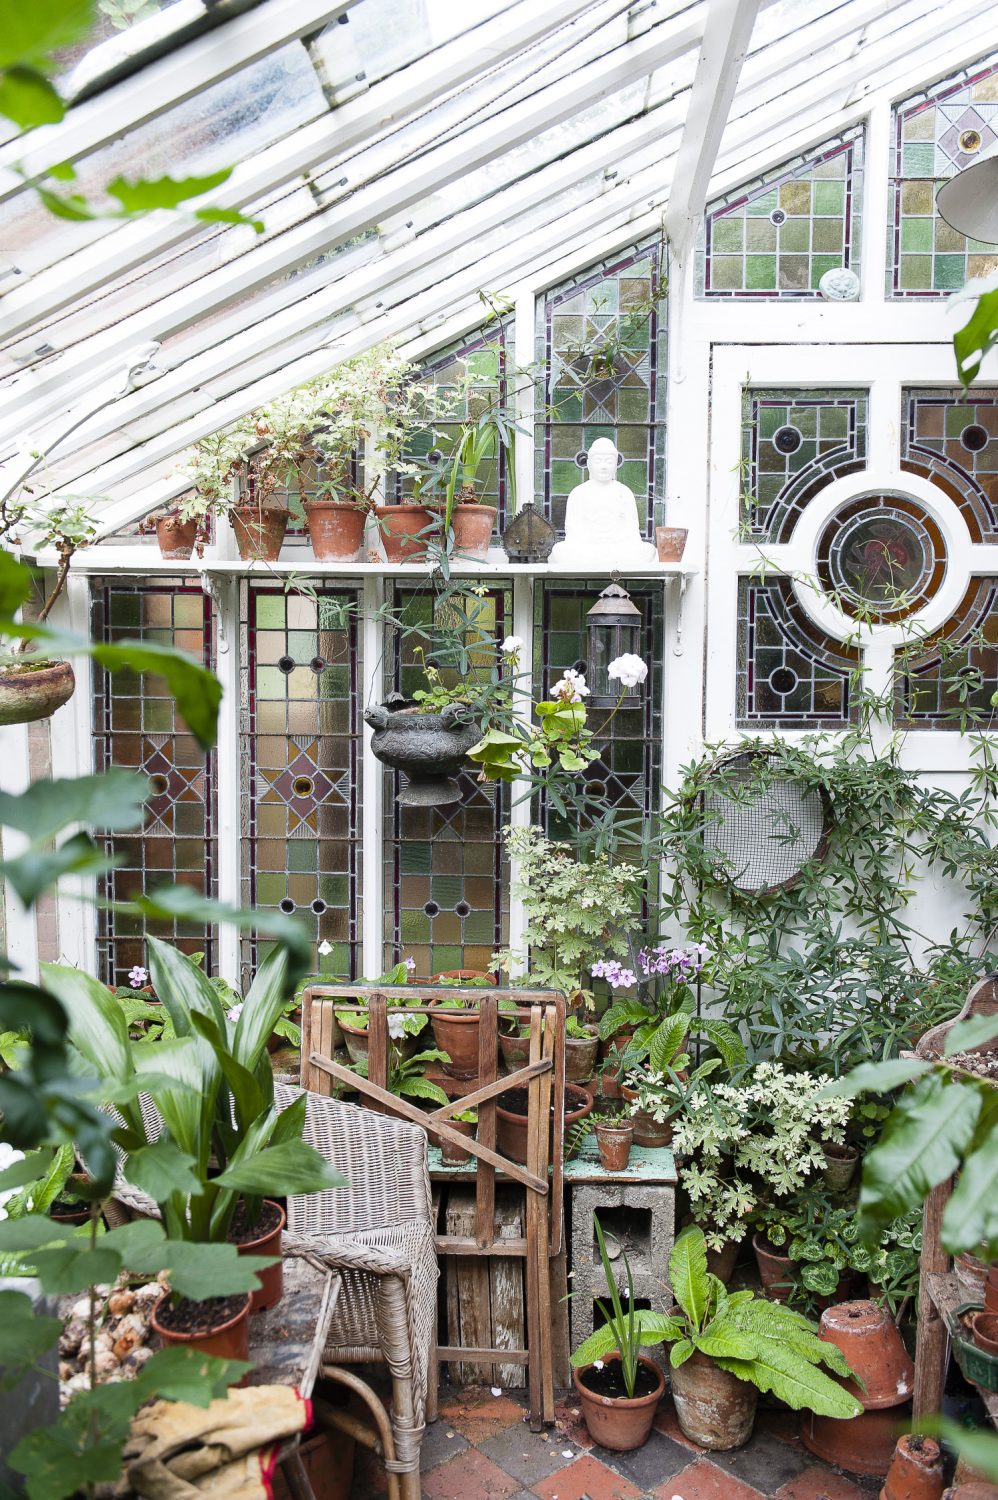 A glasshouse in the garden with stained glass windows